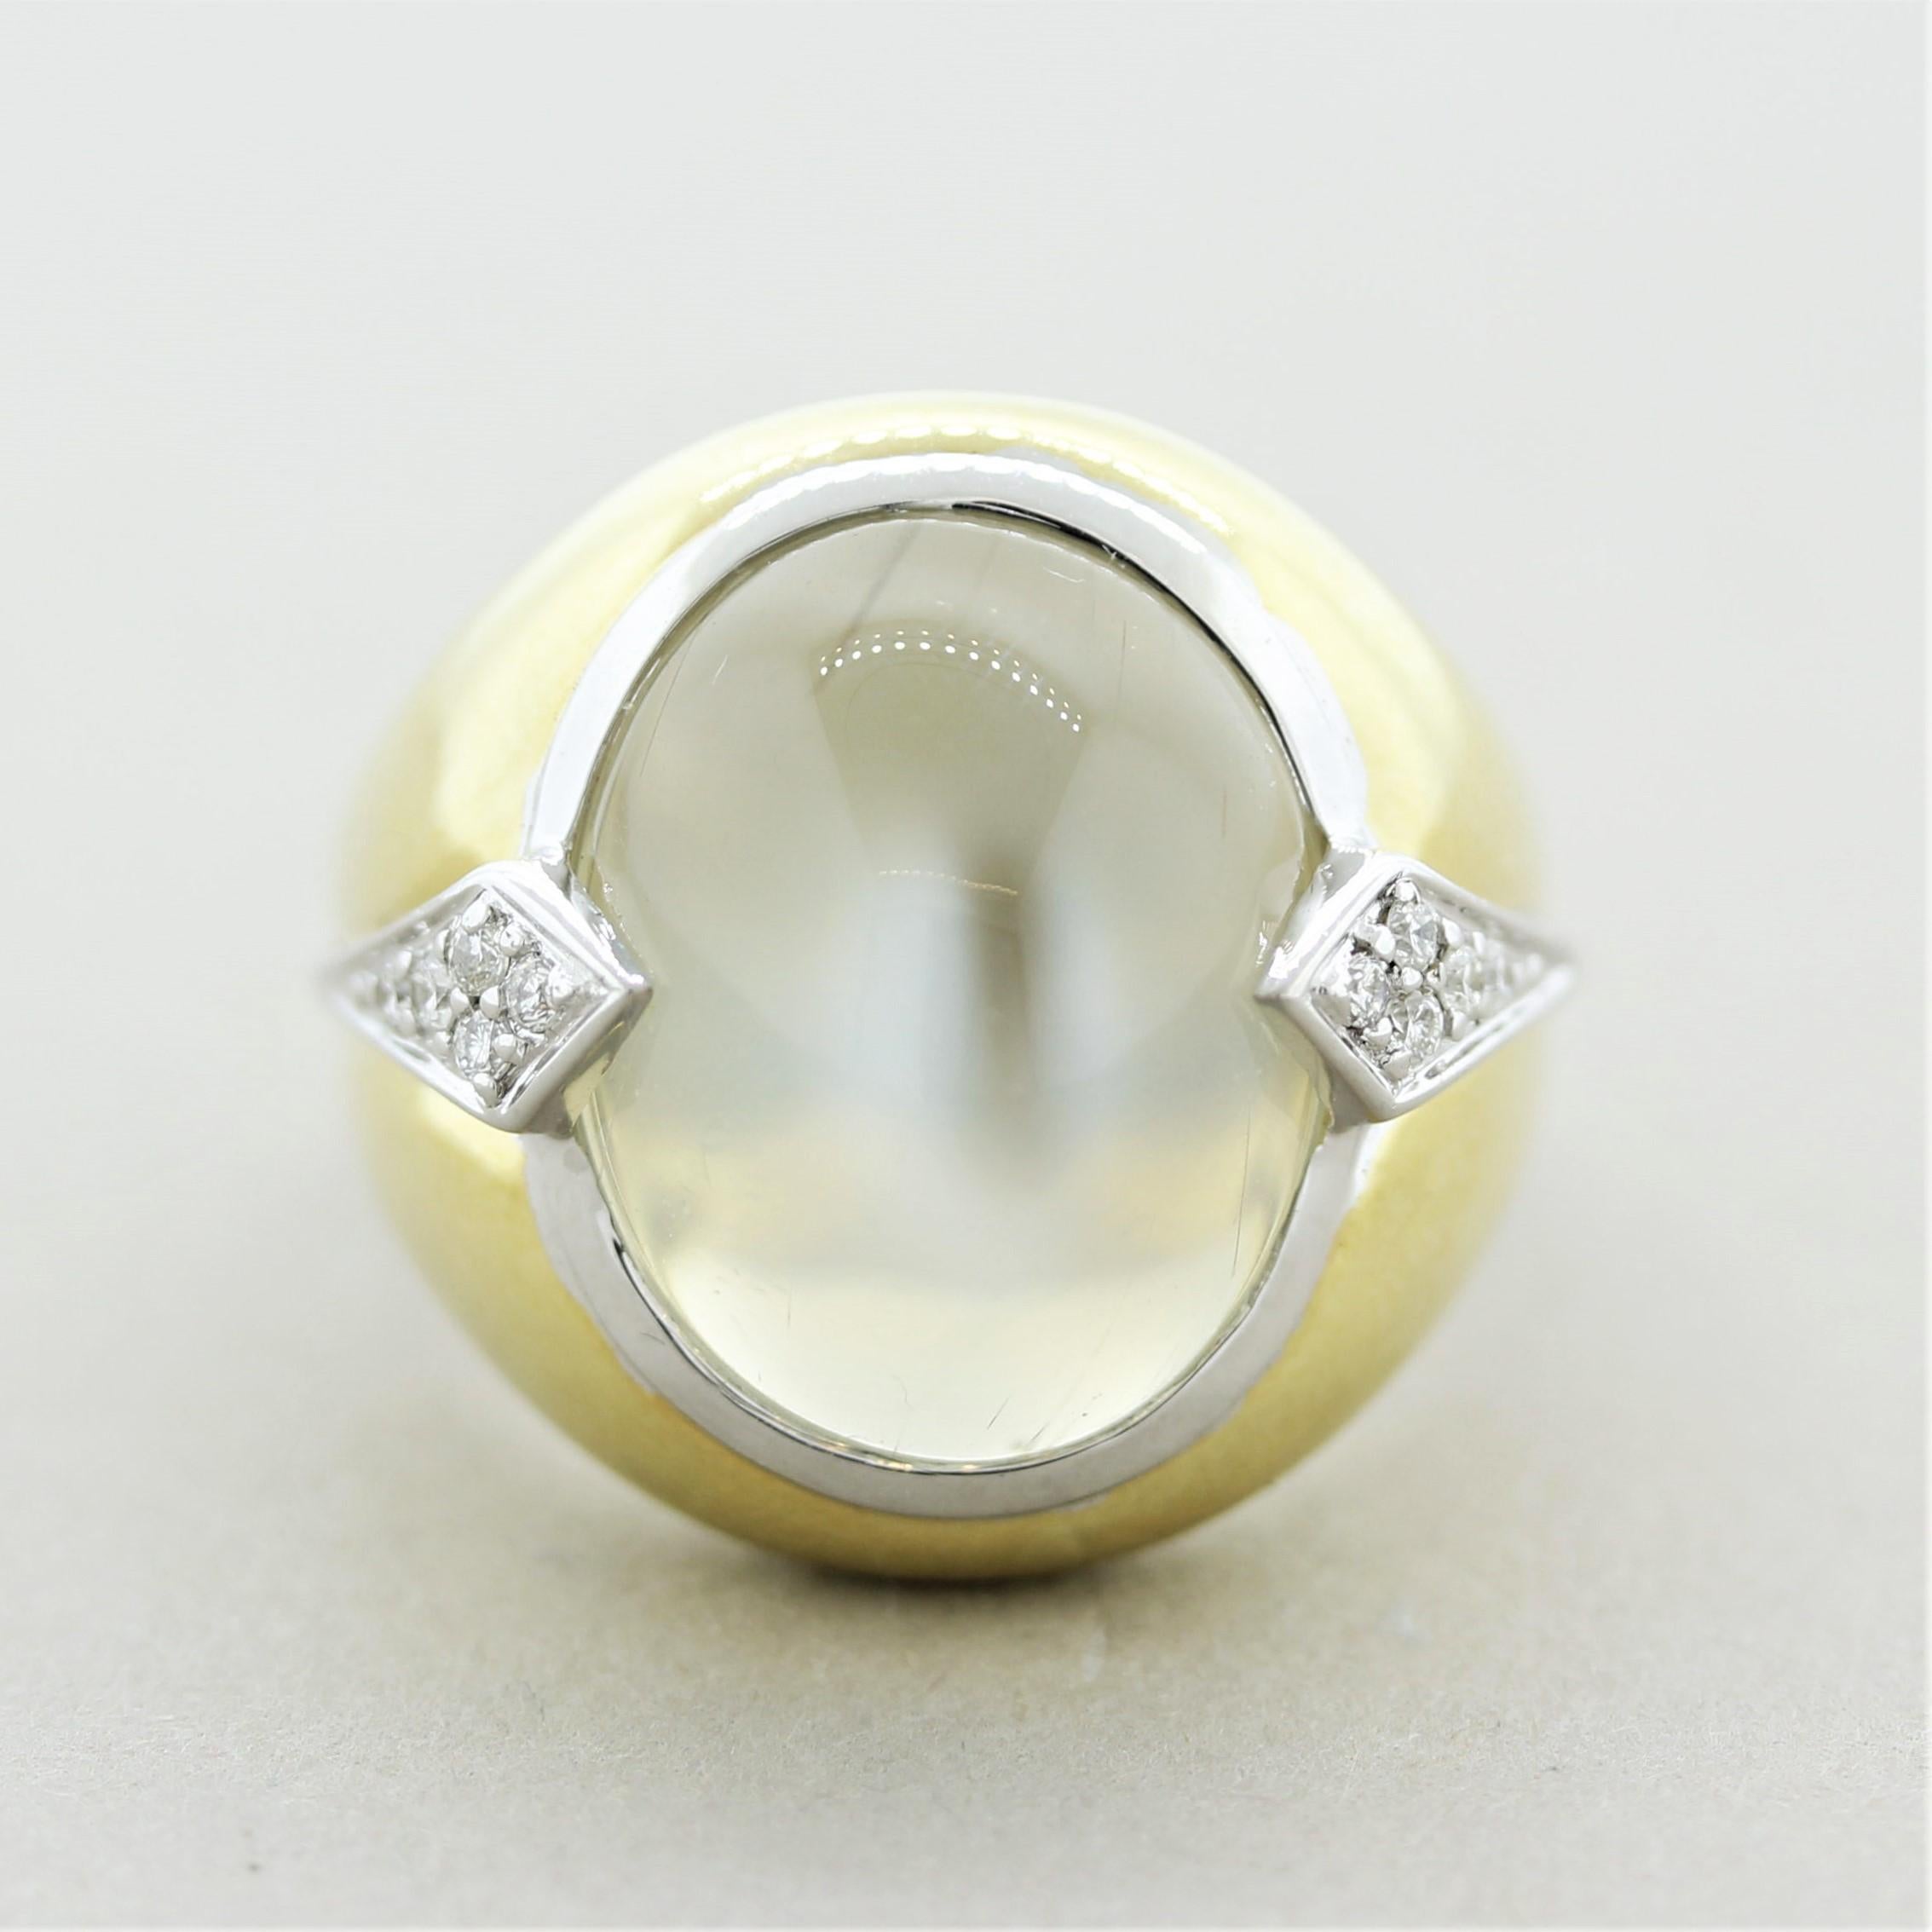 A large and impressive moonstone ring! The moonstone weighs 13.74 carats and is of excellent quality. Bright bluish-white flashes can be seen across the stone known as adularescence (a special phenomenon of fine quality moonstones). It is accented